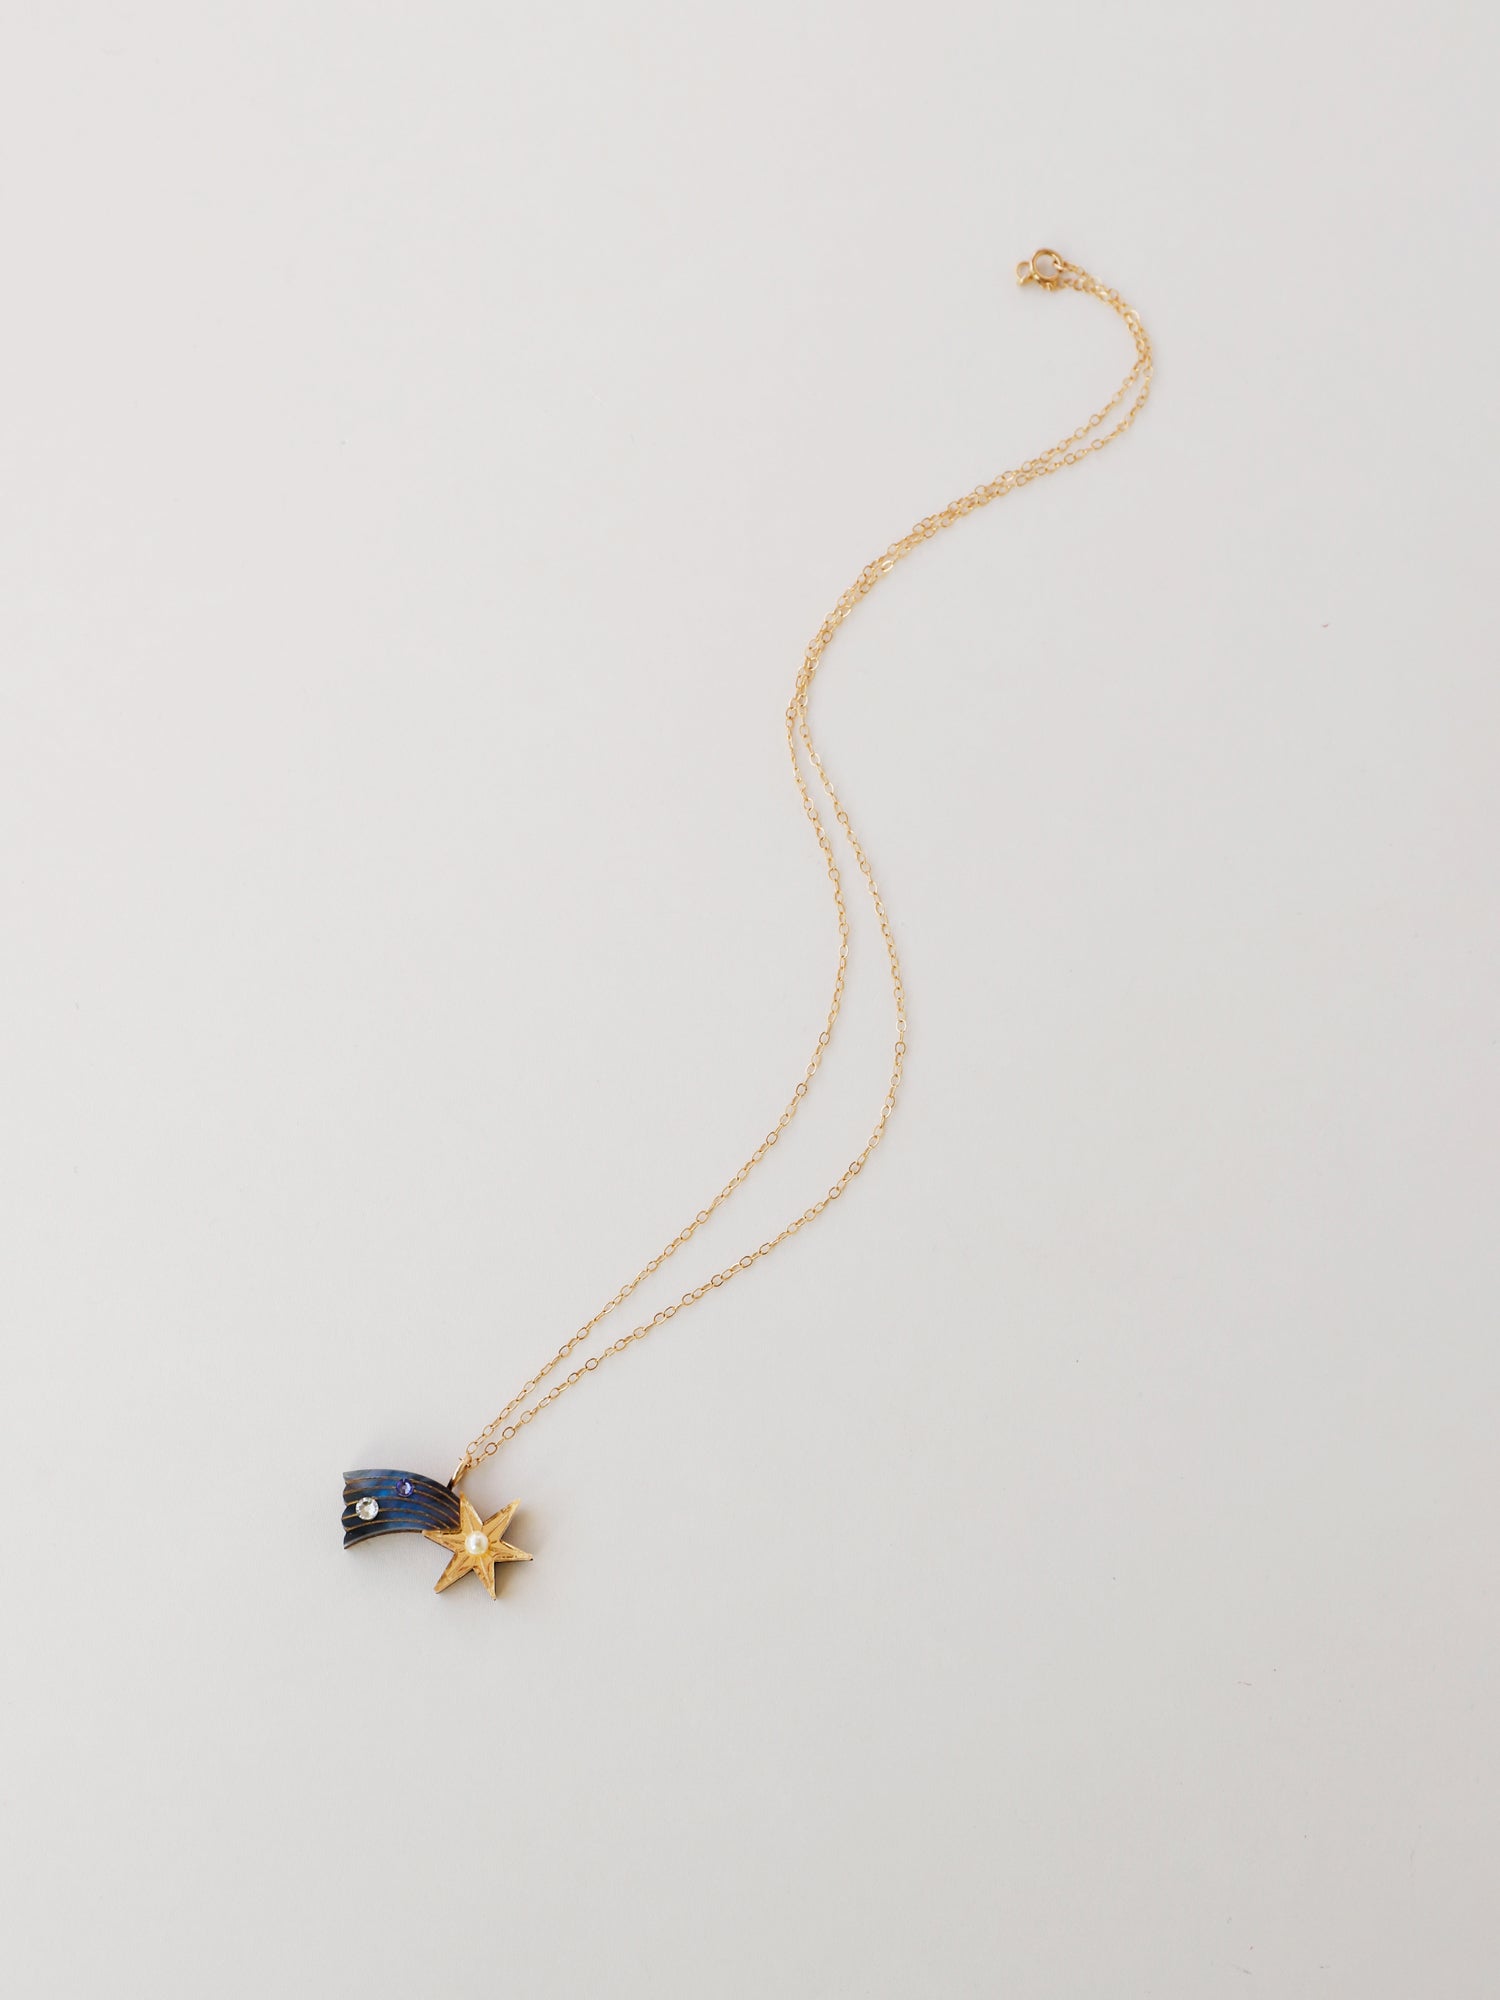 Shooting Star pendant necklace made with laser cut deep blue acrylic, Czech glass pearls and hand inked details. Wear with our 14k gold-filled chain. Handmade in the UK by Wolf & Moon.